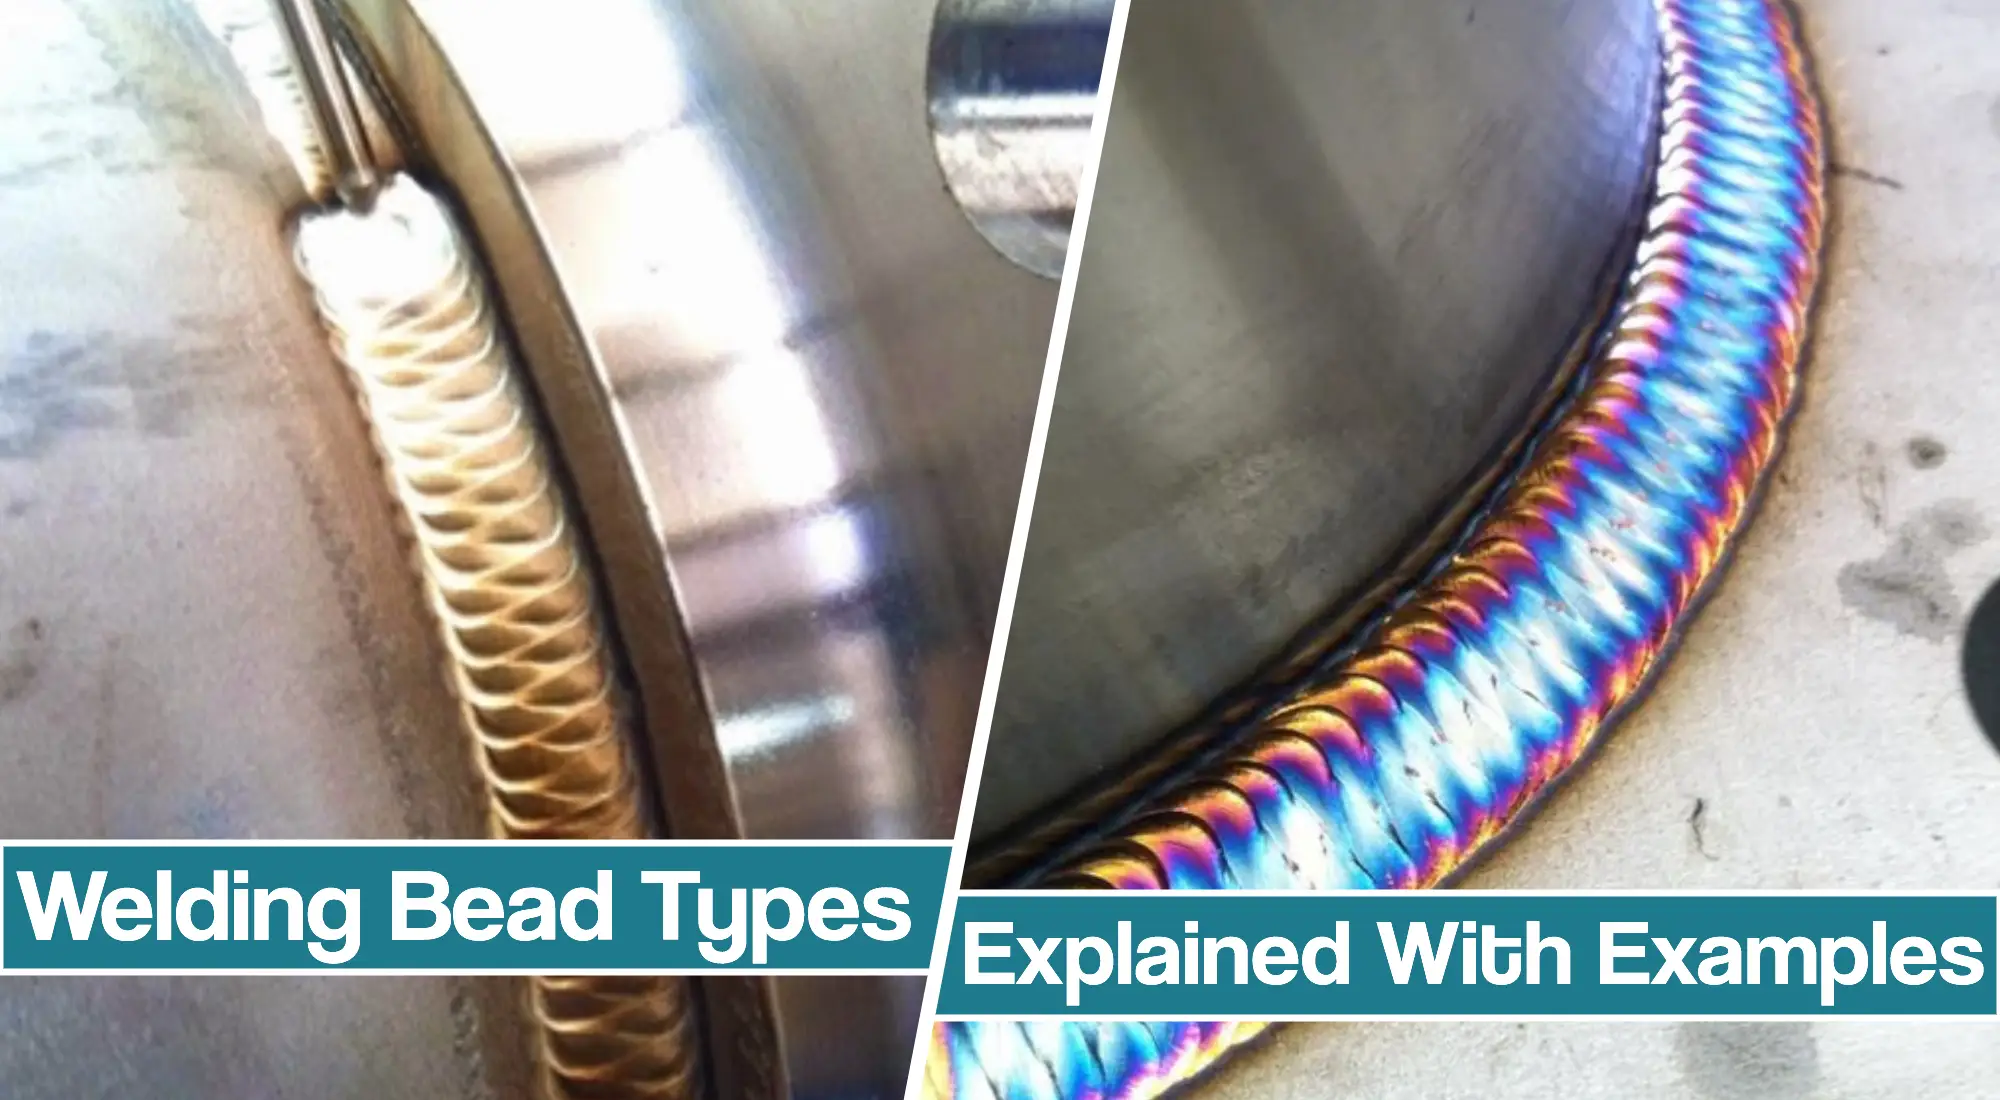 Types Of Welding Beads, Patterns, & Techniques